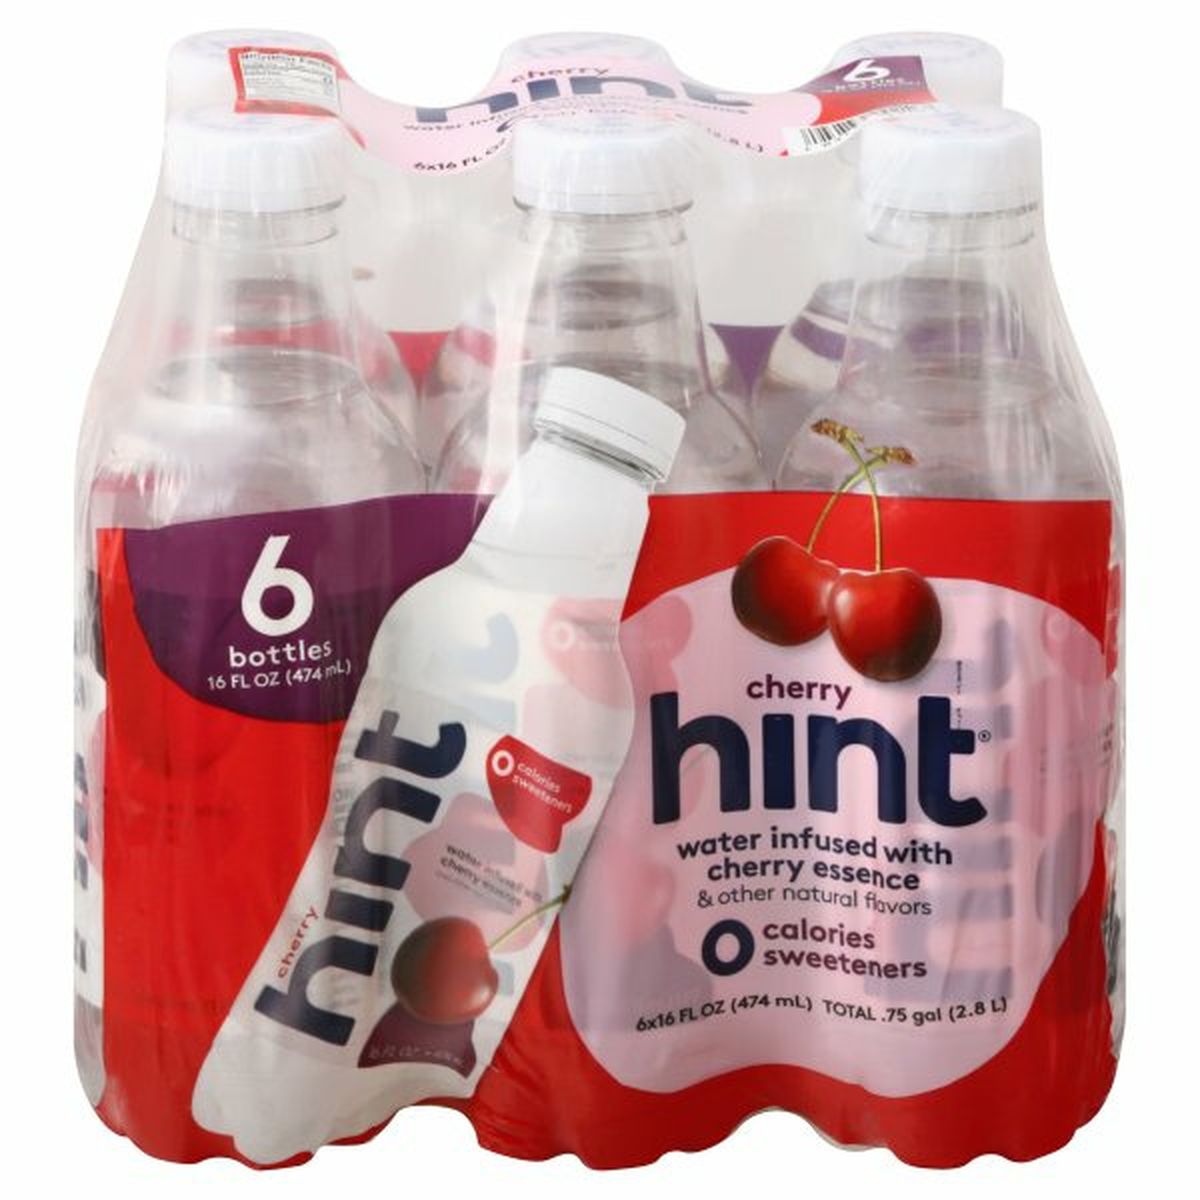 Calories in hint Infused Water, Cherry